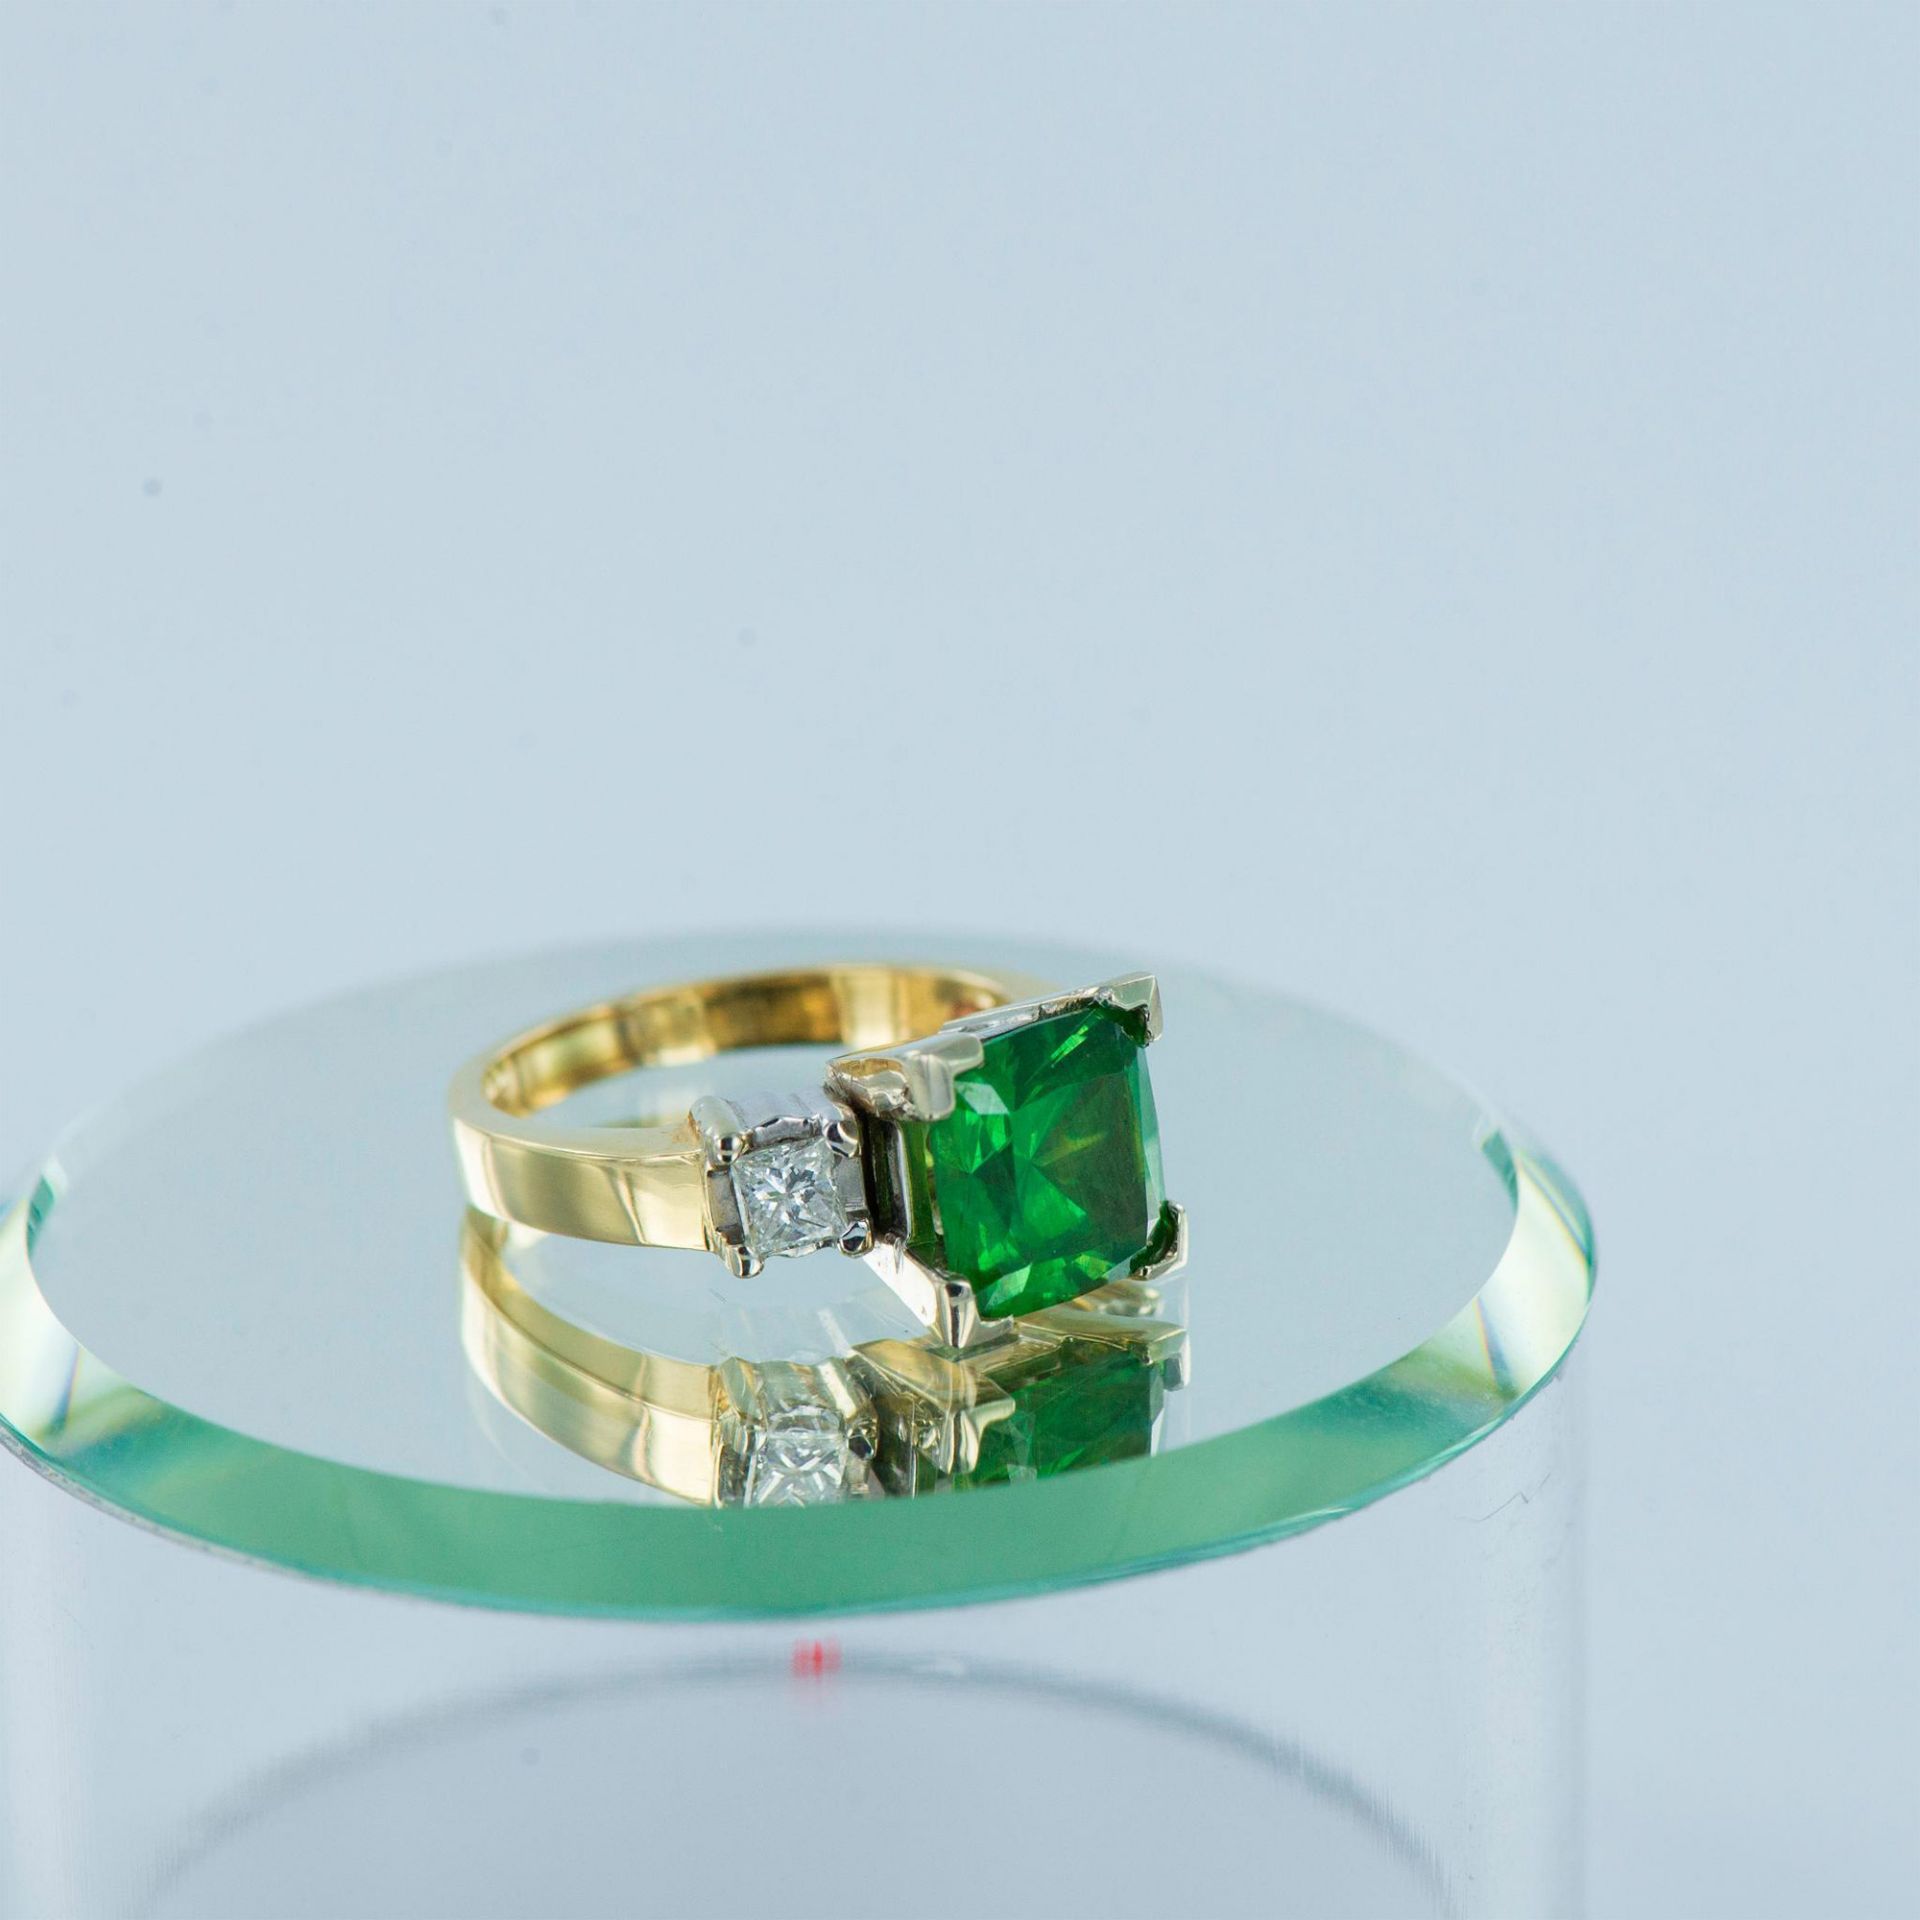 Pretty Two Tone 14K Gold, Emerald and Diamond Ring - Image 7 of 12